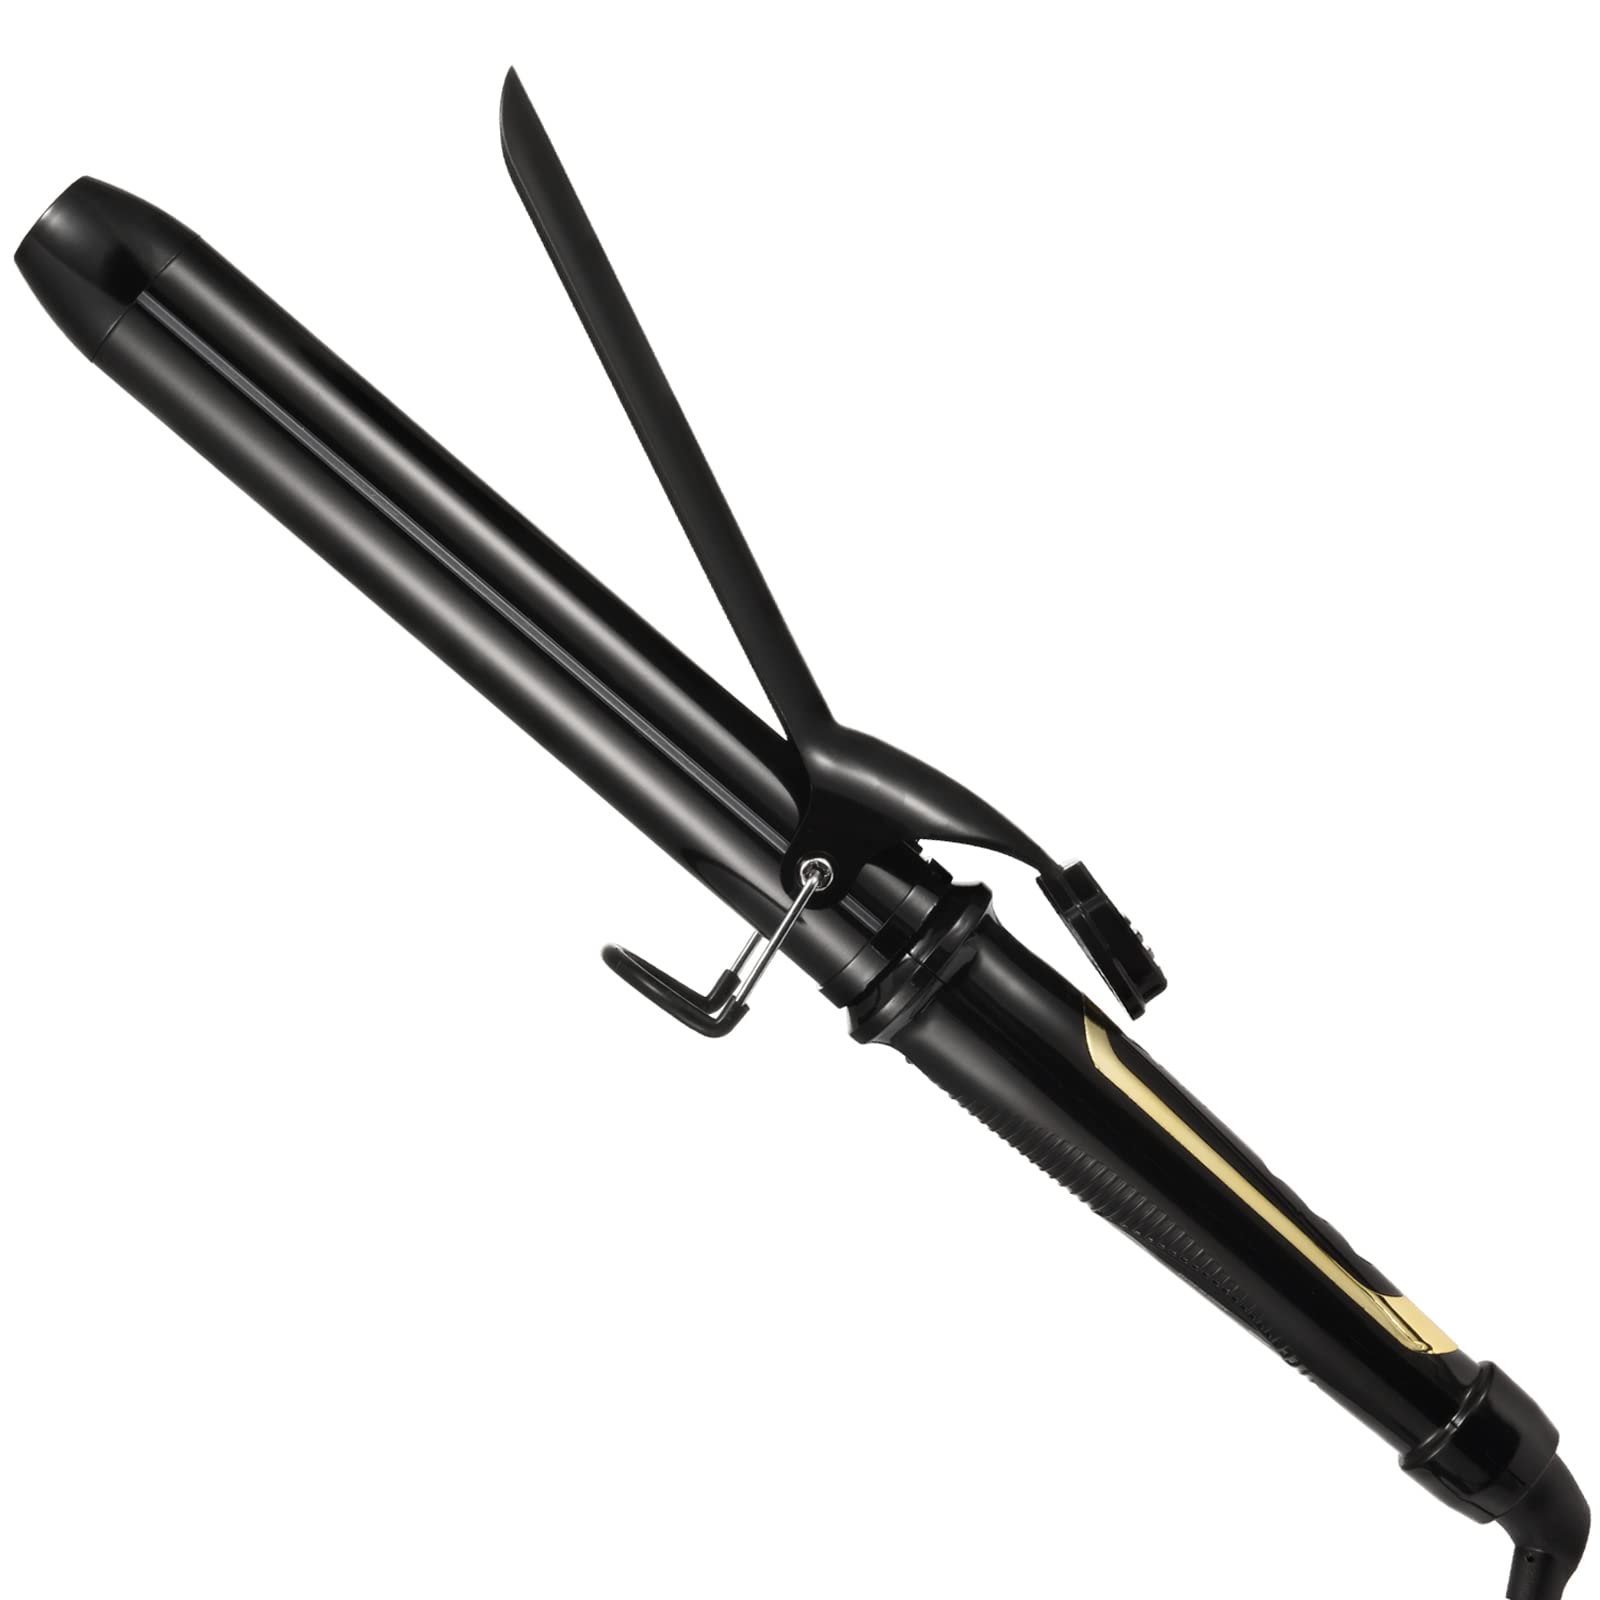 Lanvier 1.25 Inch Clipped Curling Iron with Extra Long Tourmaline Ceramic Barrel, Professional 1 1/4 Inch Hair Curler Curling Iron up to 450°F Dual Voltage for Traveling, Hair Waving Style Tool–Black